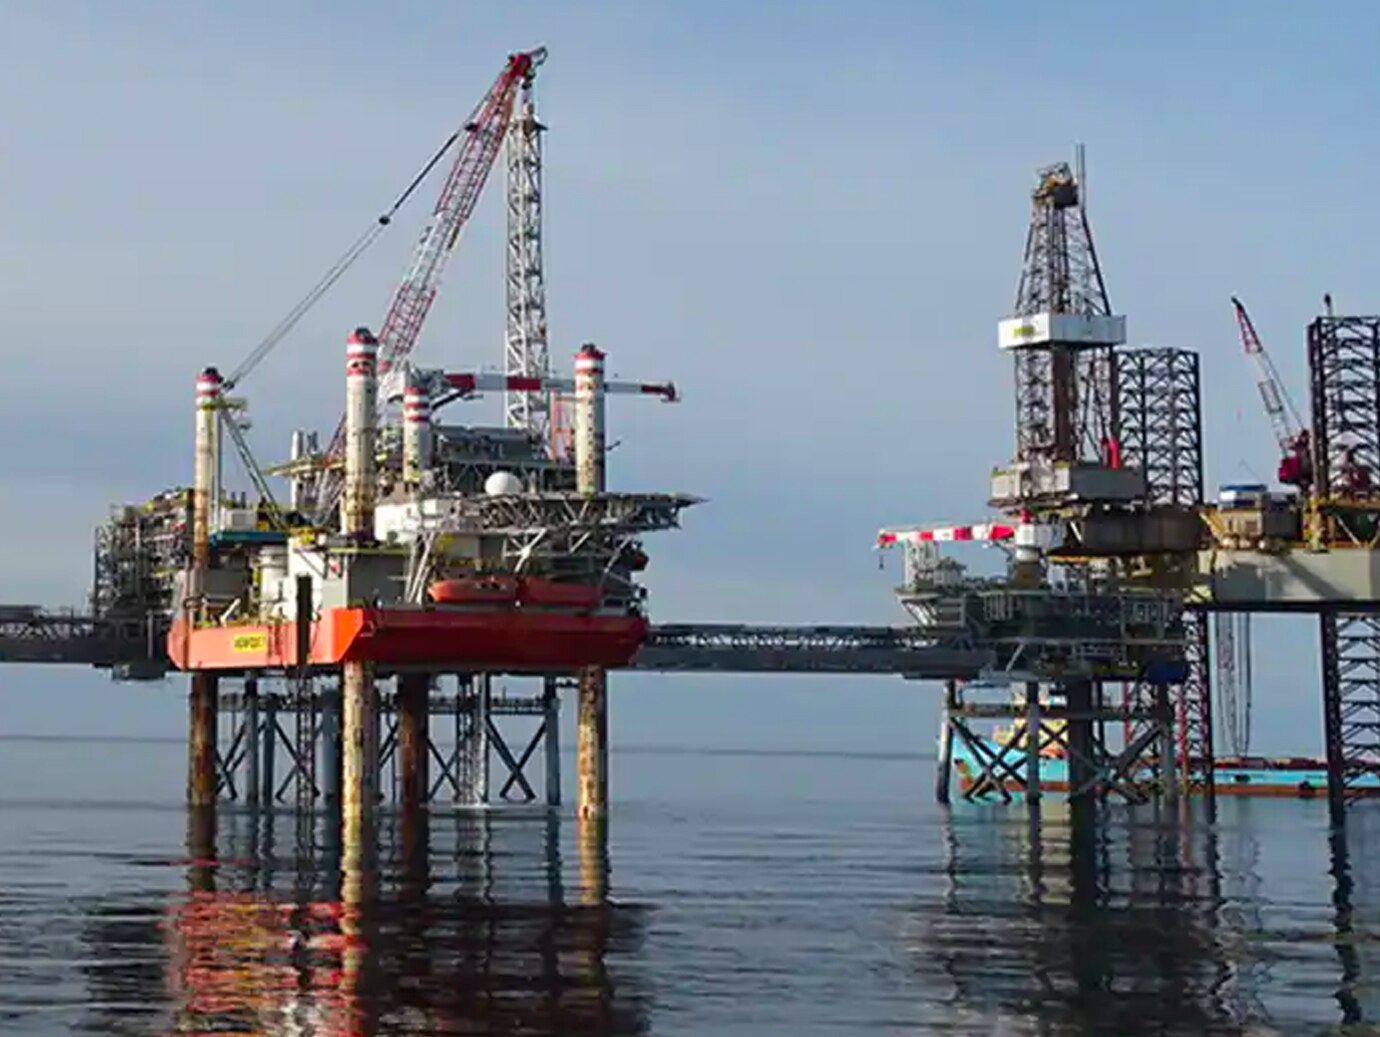 Two offshore oil rigs in operation at sea